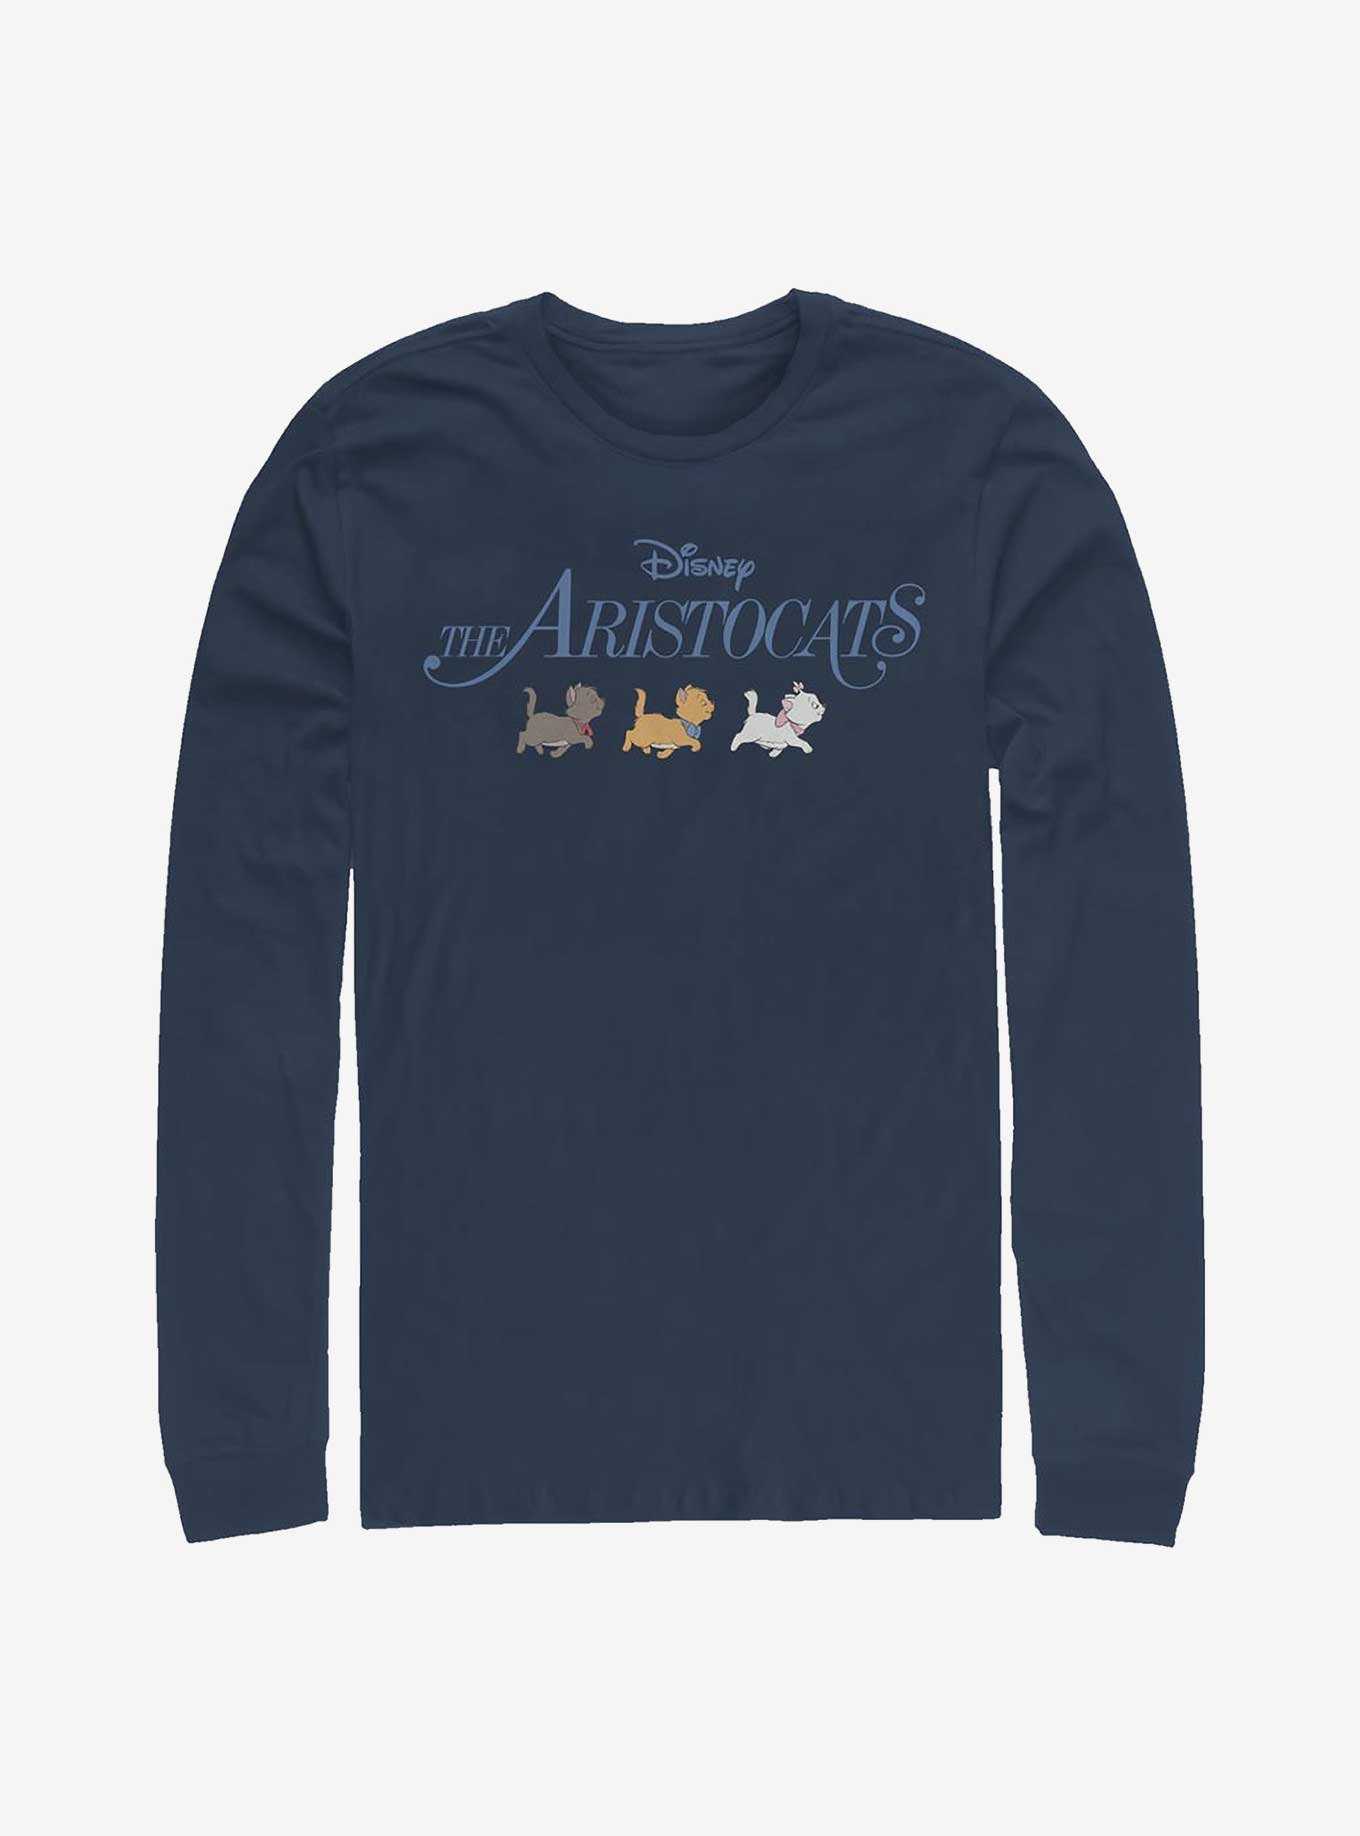 OFFICIAL The Aristocats Shirts, Gifts & Boxlunch Merchandise 